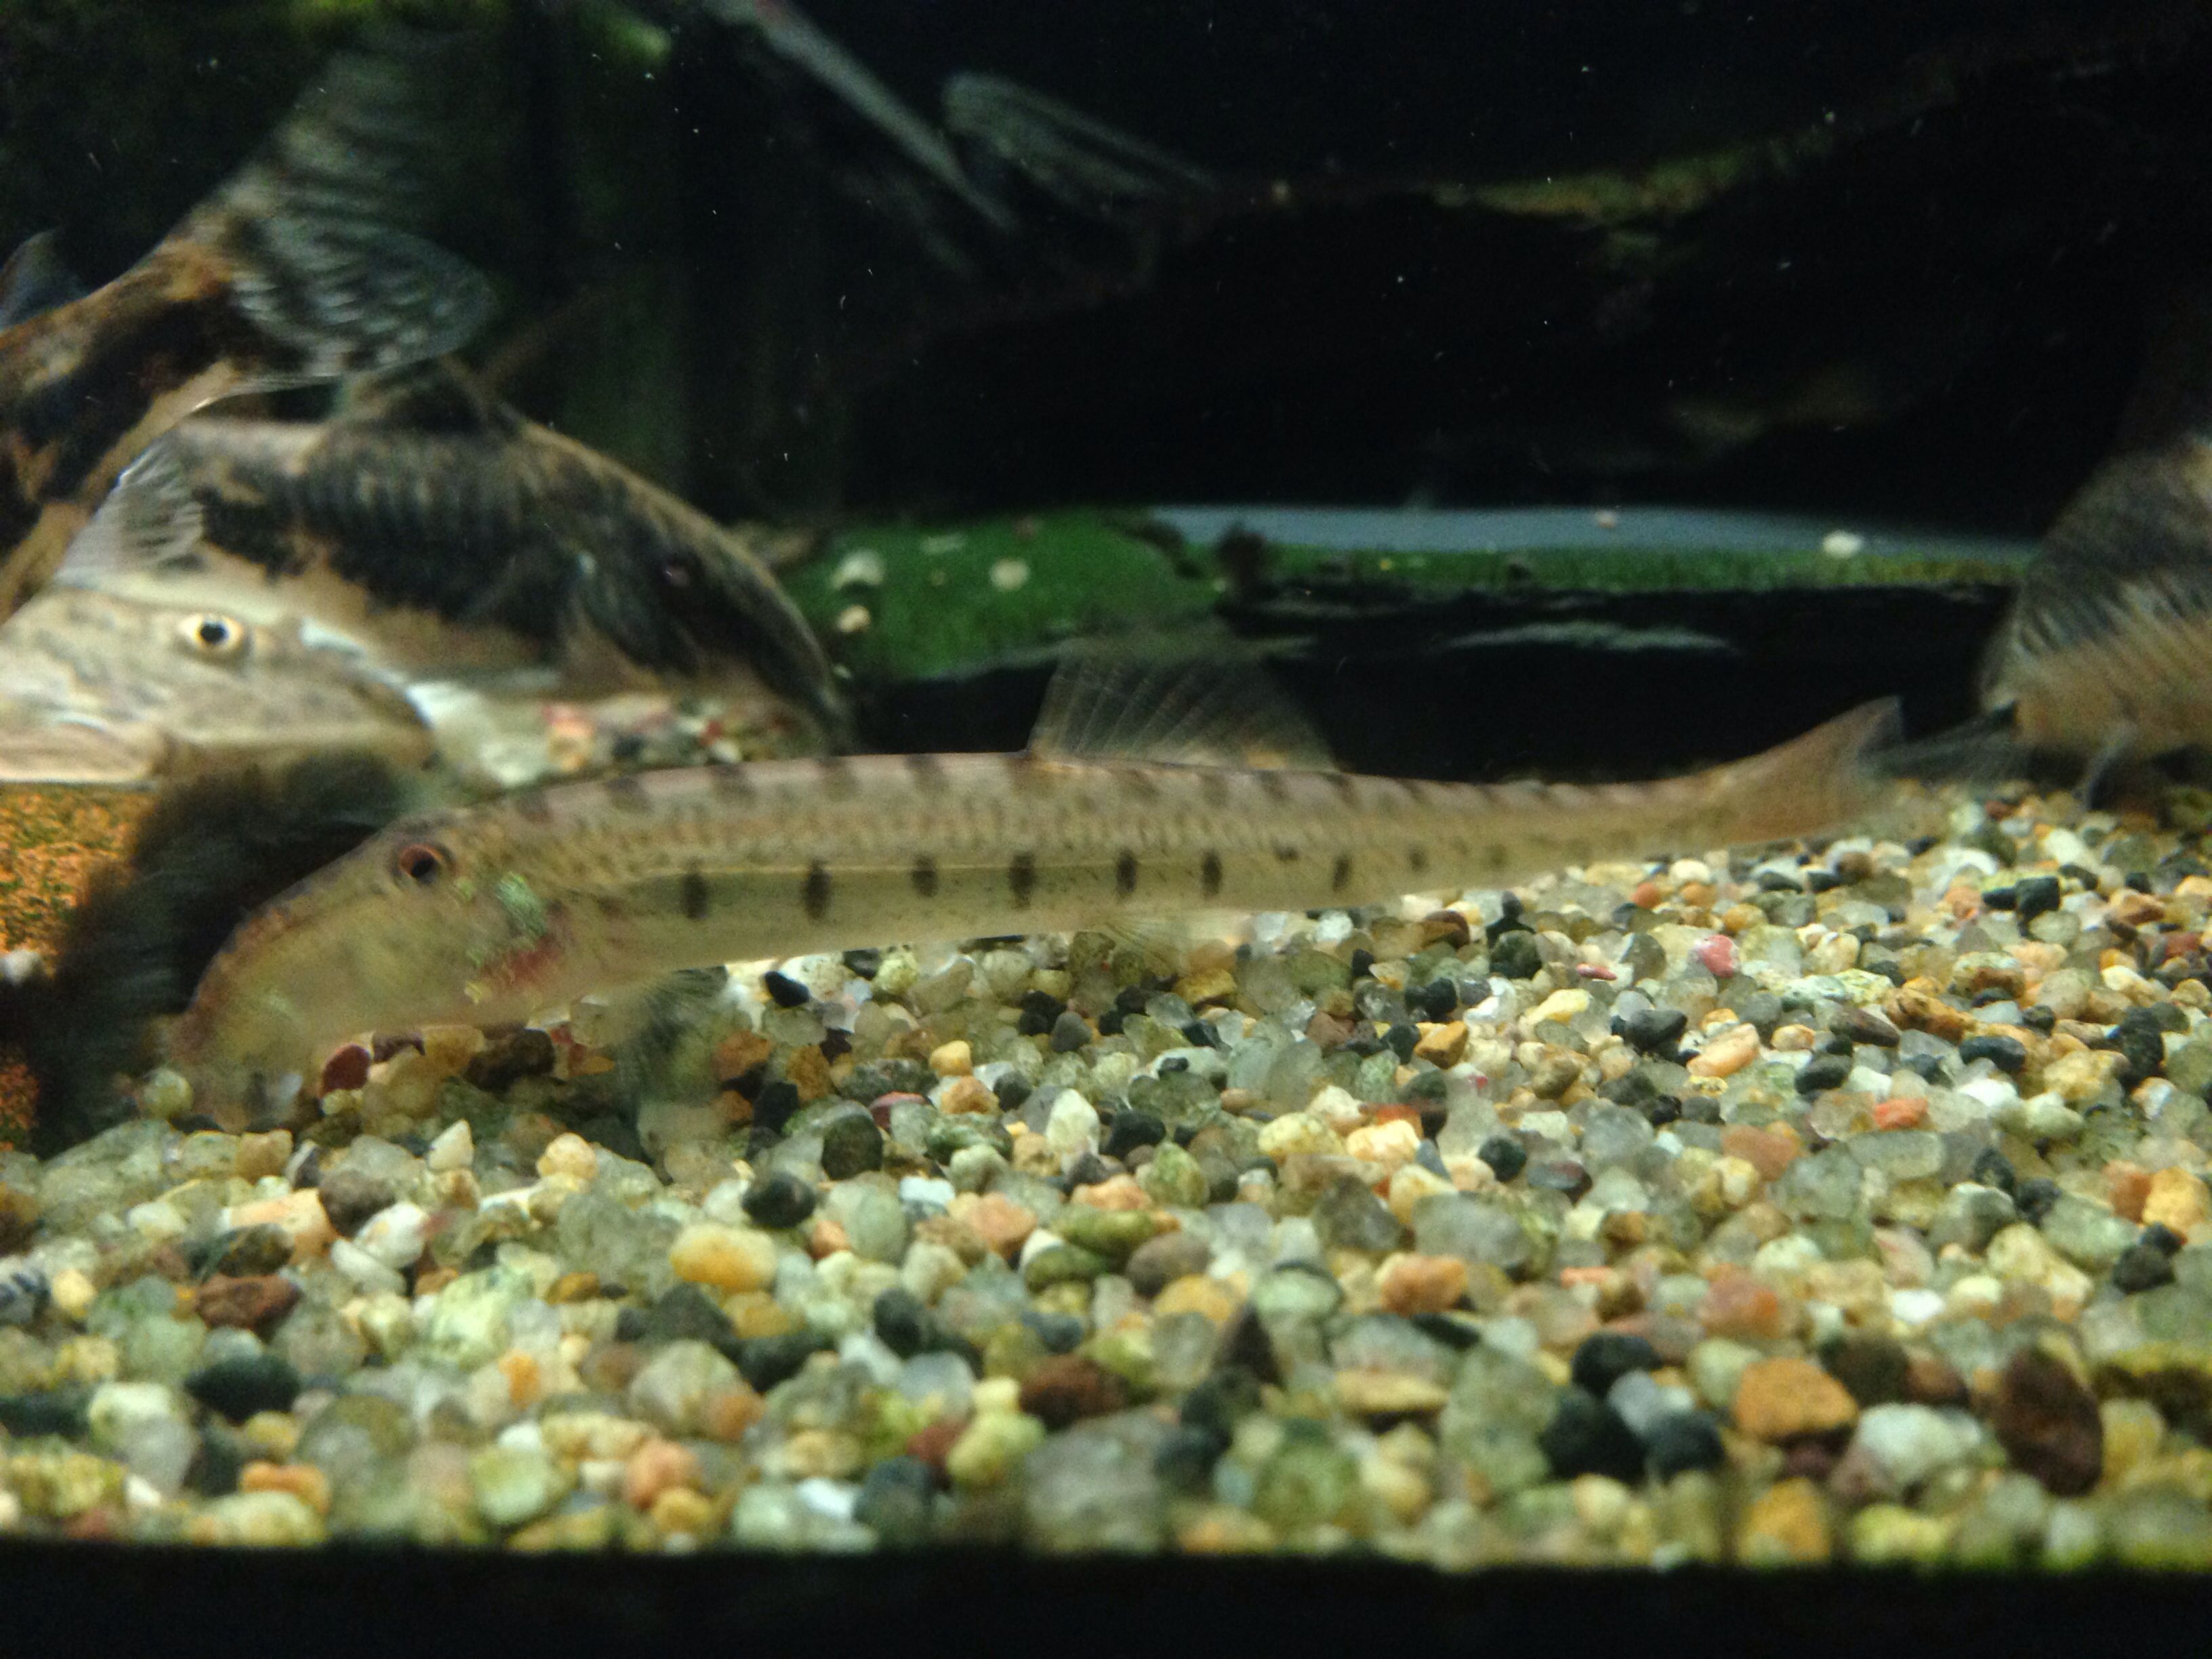 Horse face loach | Loaches | Pinterest | Horse face and Horse